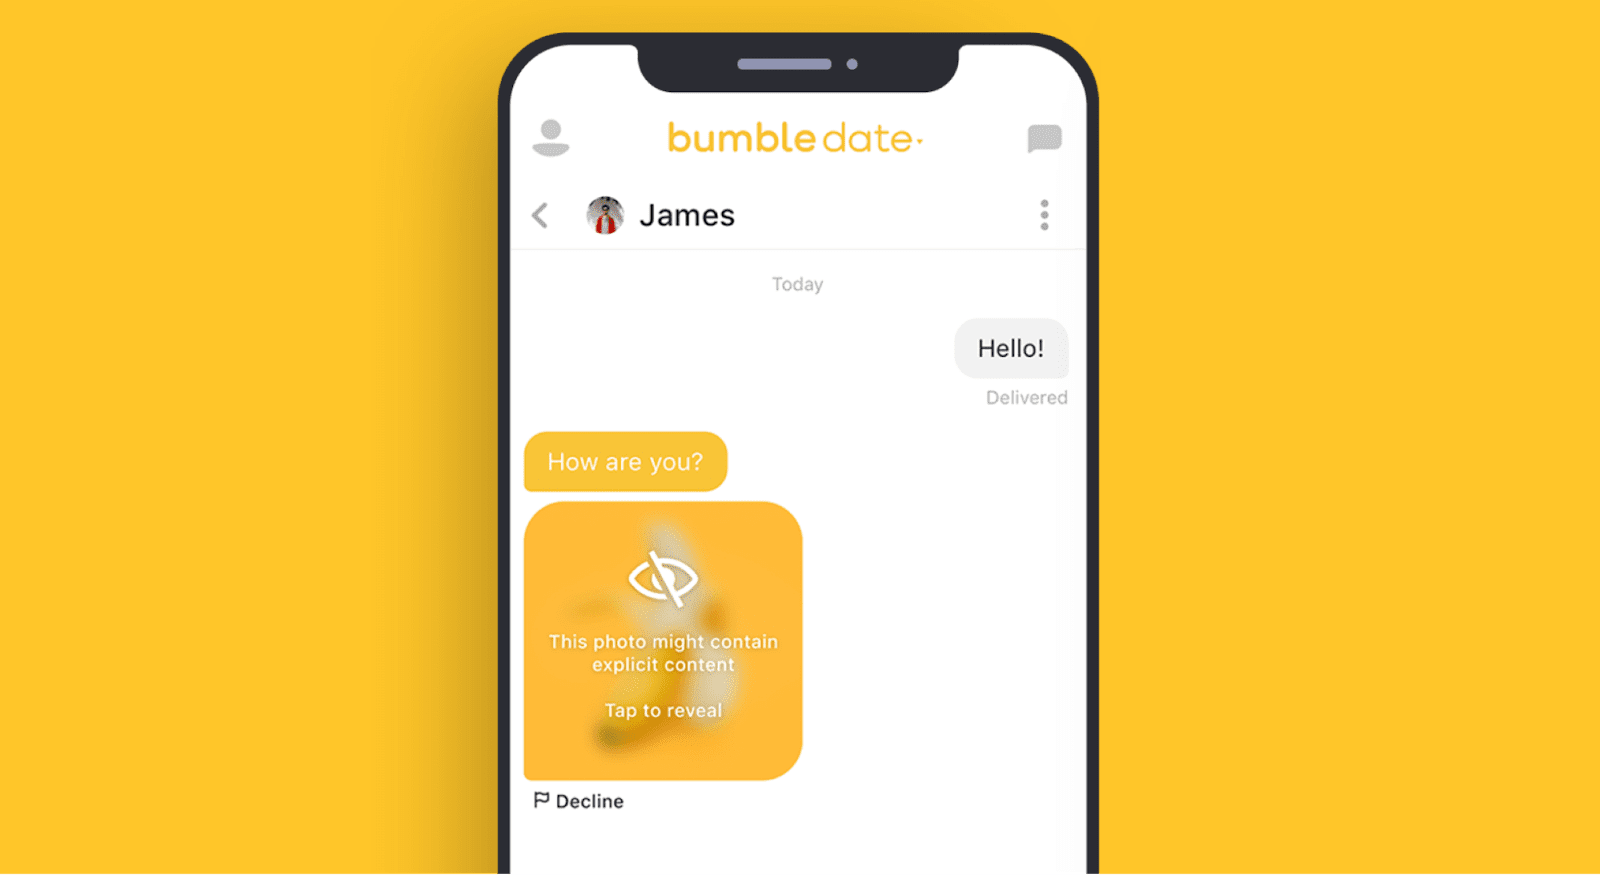 Bumble’s Private Detector blurs potentially explicit content, letting the user decide whether to reveal the image or not.